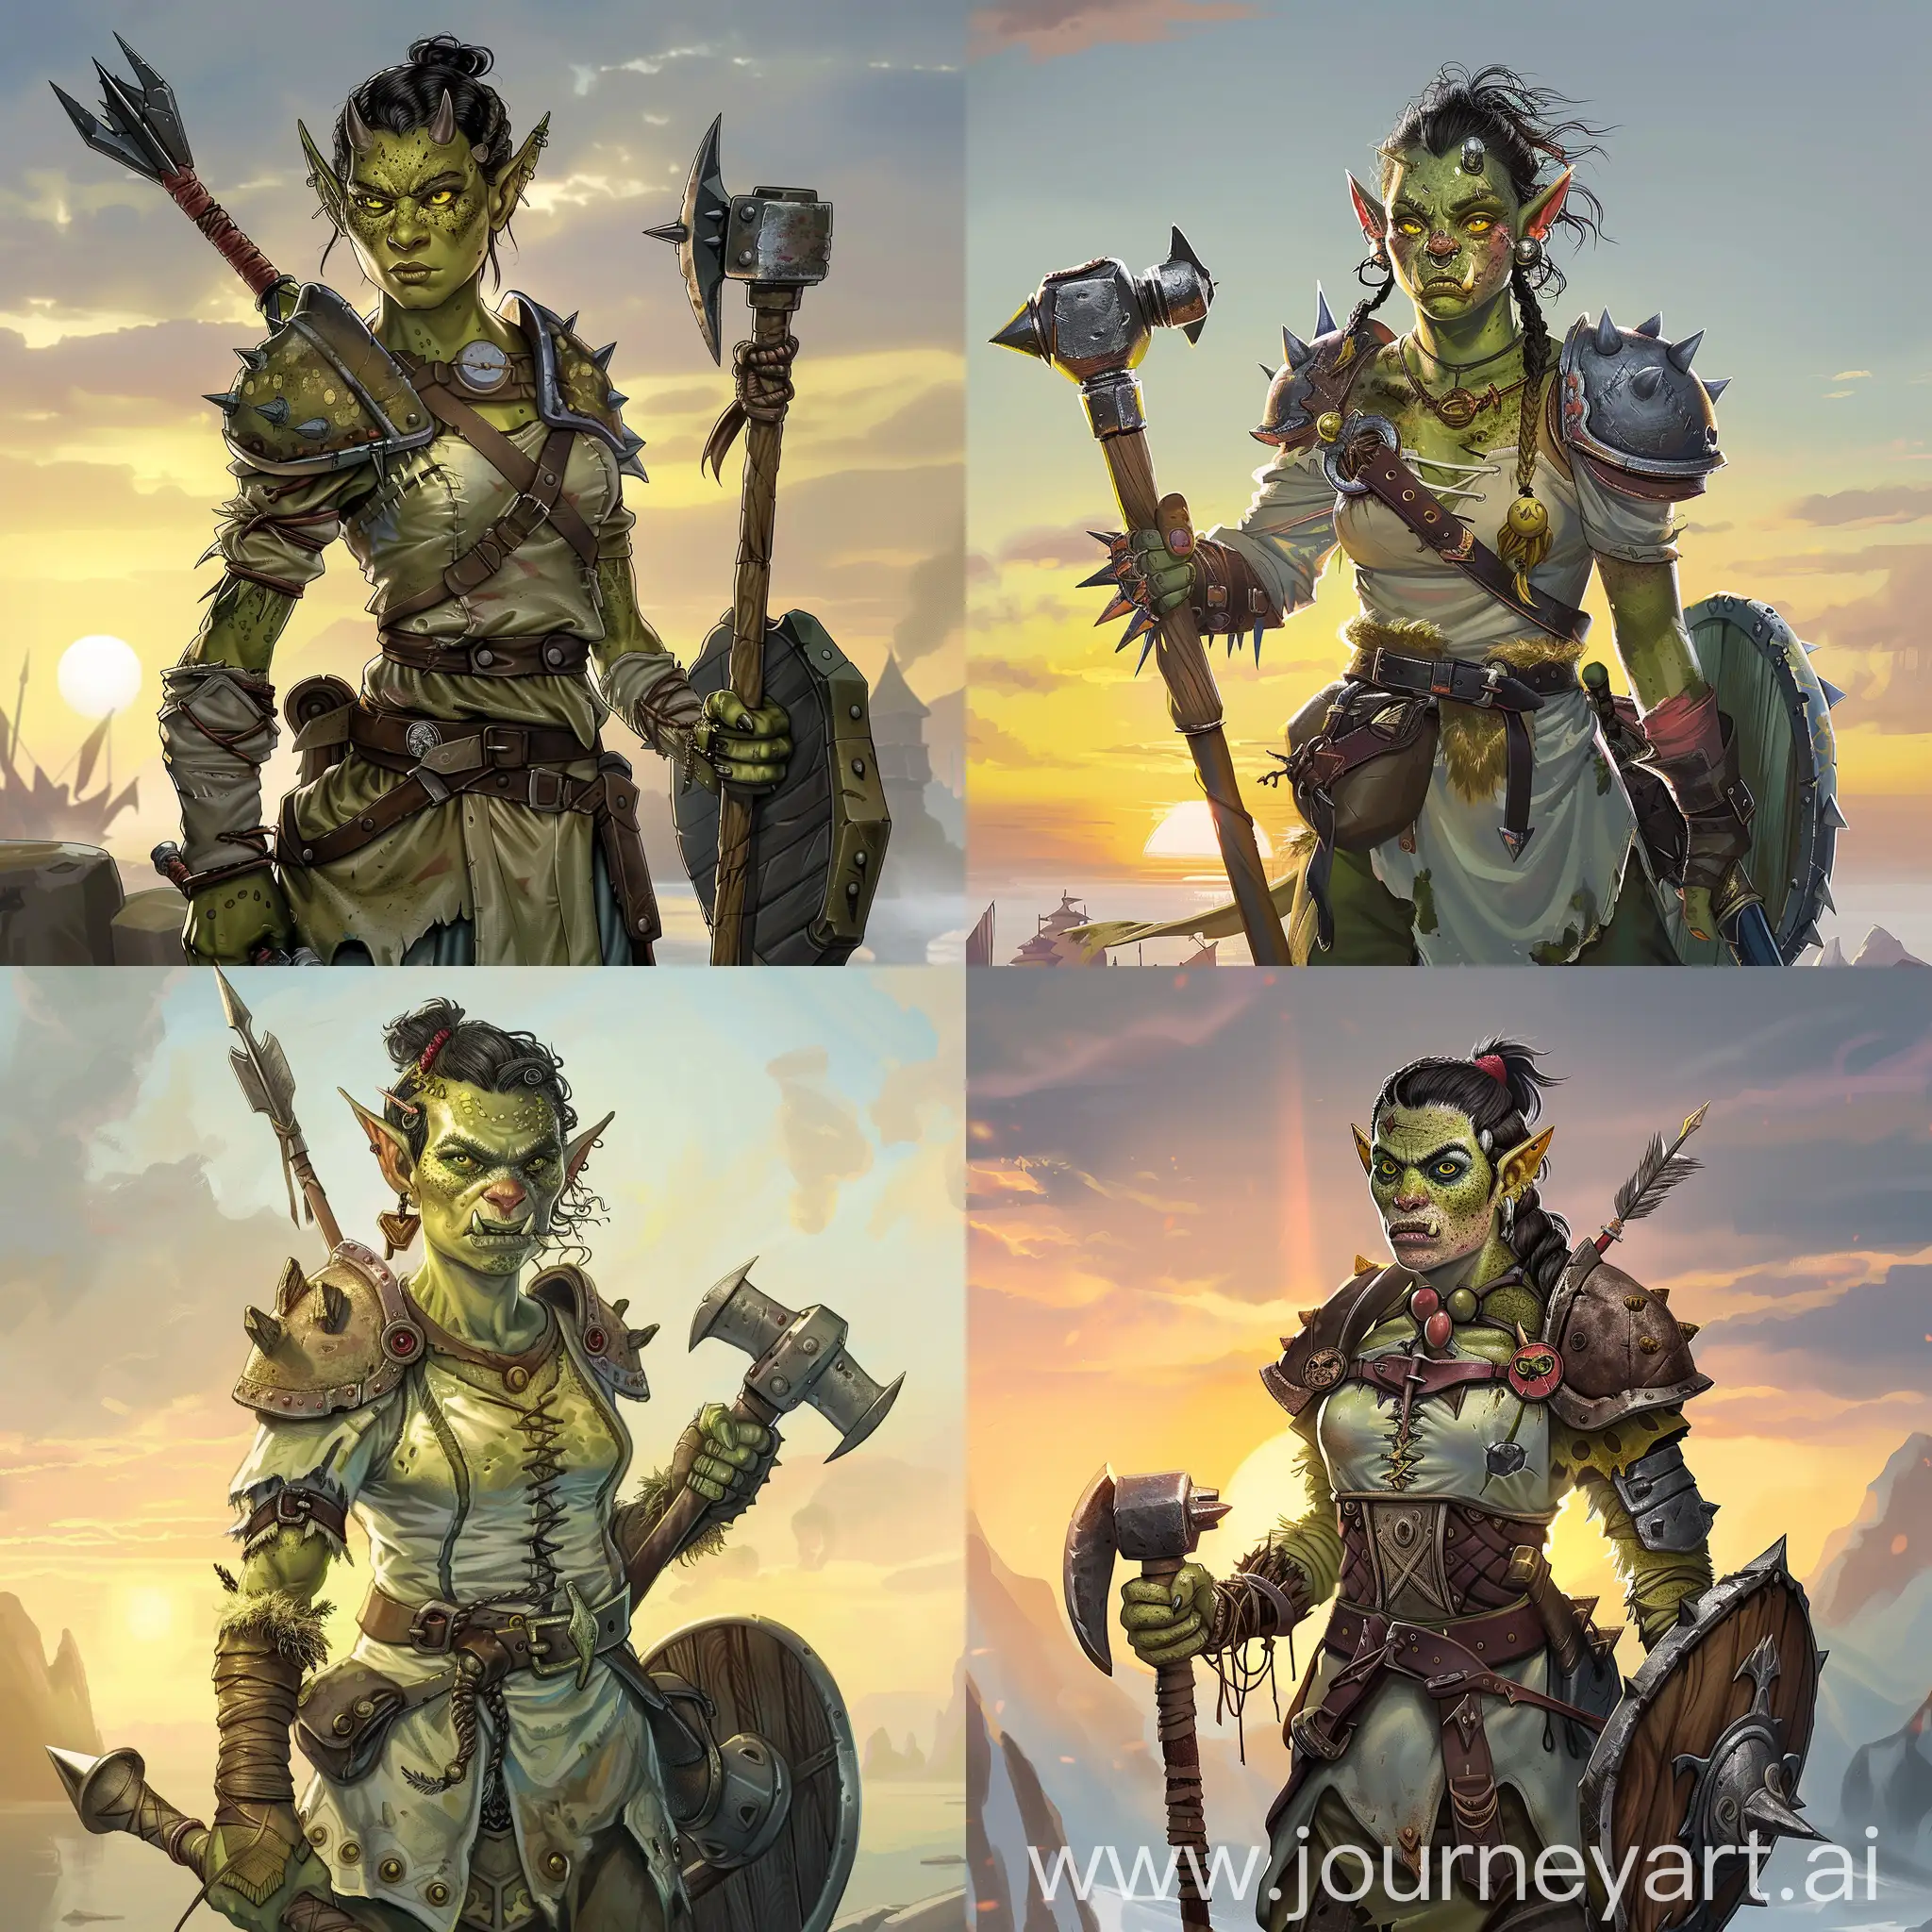 Draw a character from the Dungeons and Dragons universe according to the following description: she is female orc, dressed in light medieval warrior clothes. She has a mace and a shield. She has green skin with freckles, yellow eyes, short black hair with little braid. Sharp fangs are visible from under the lower lip. Dawn in the background